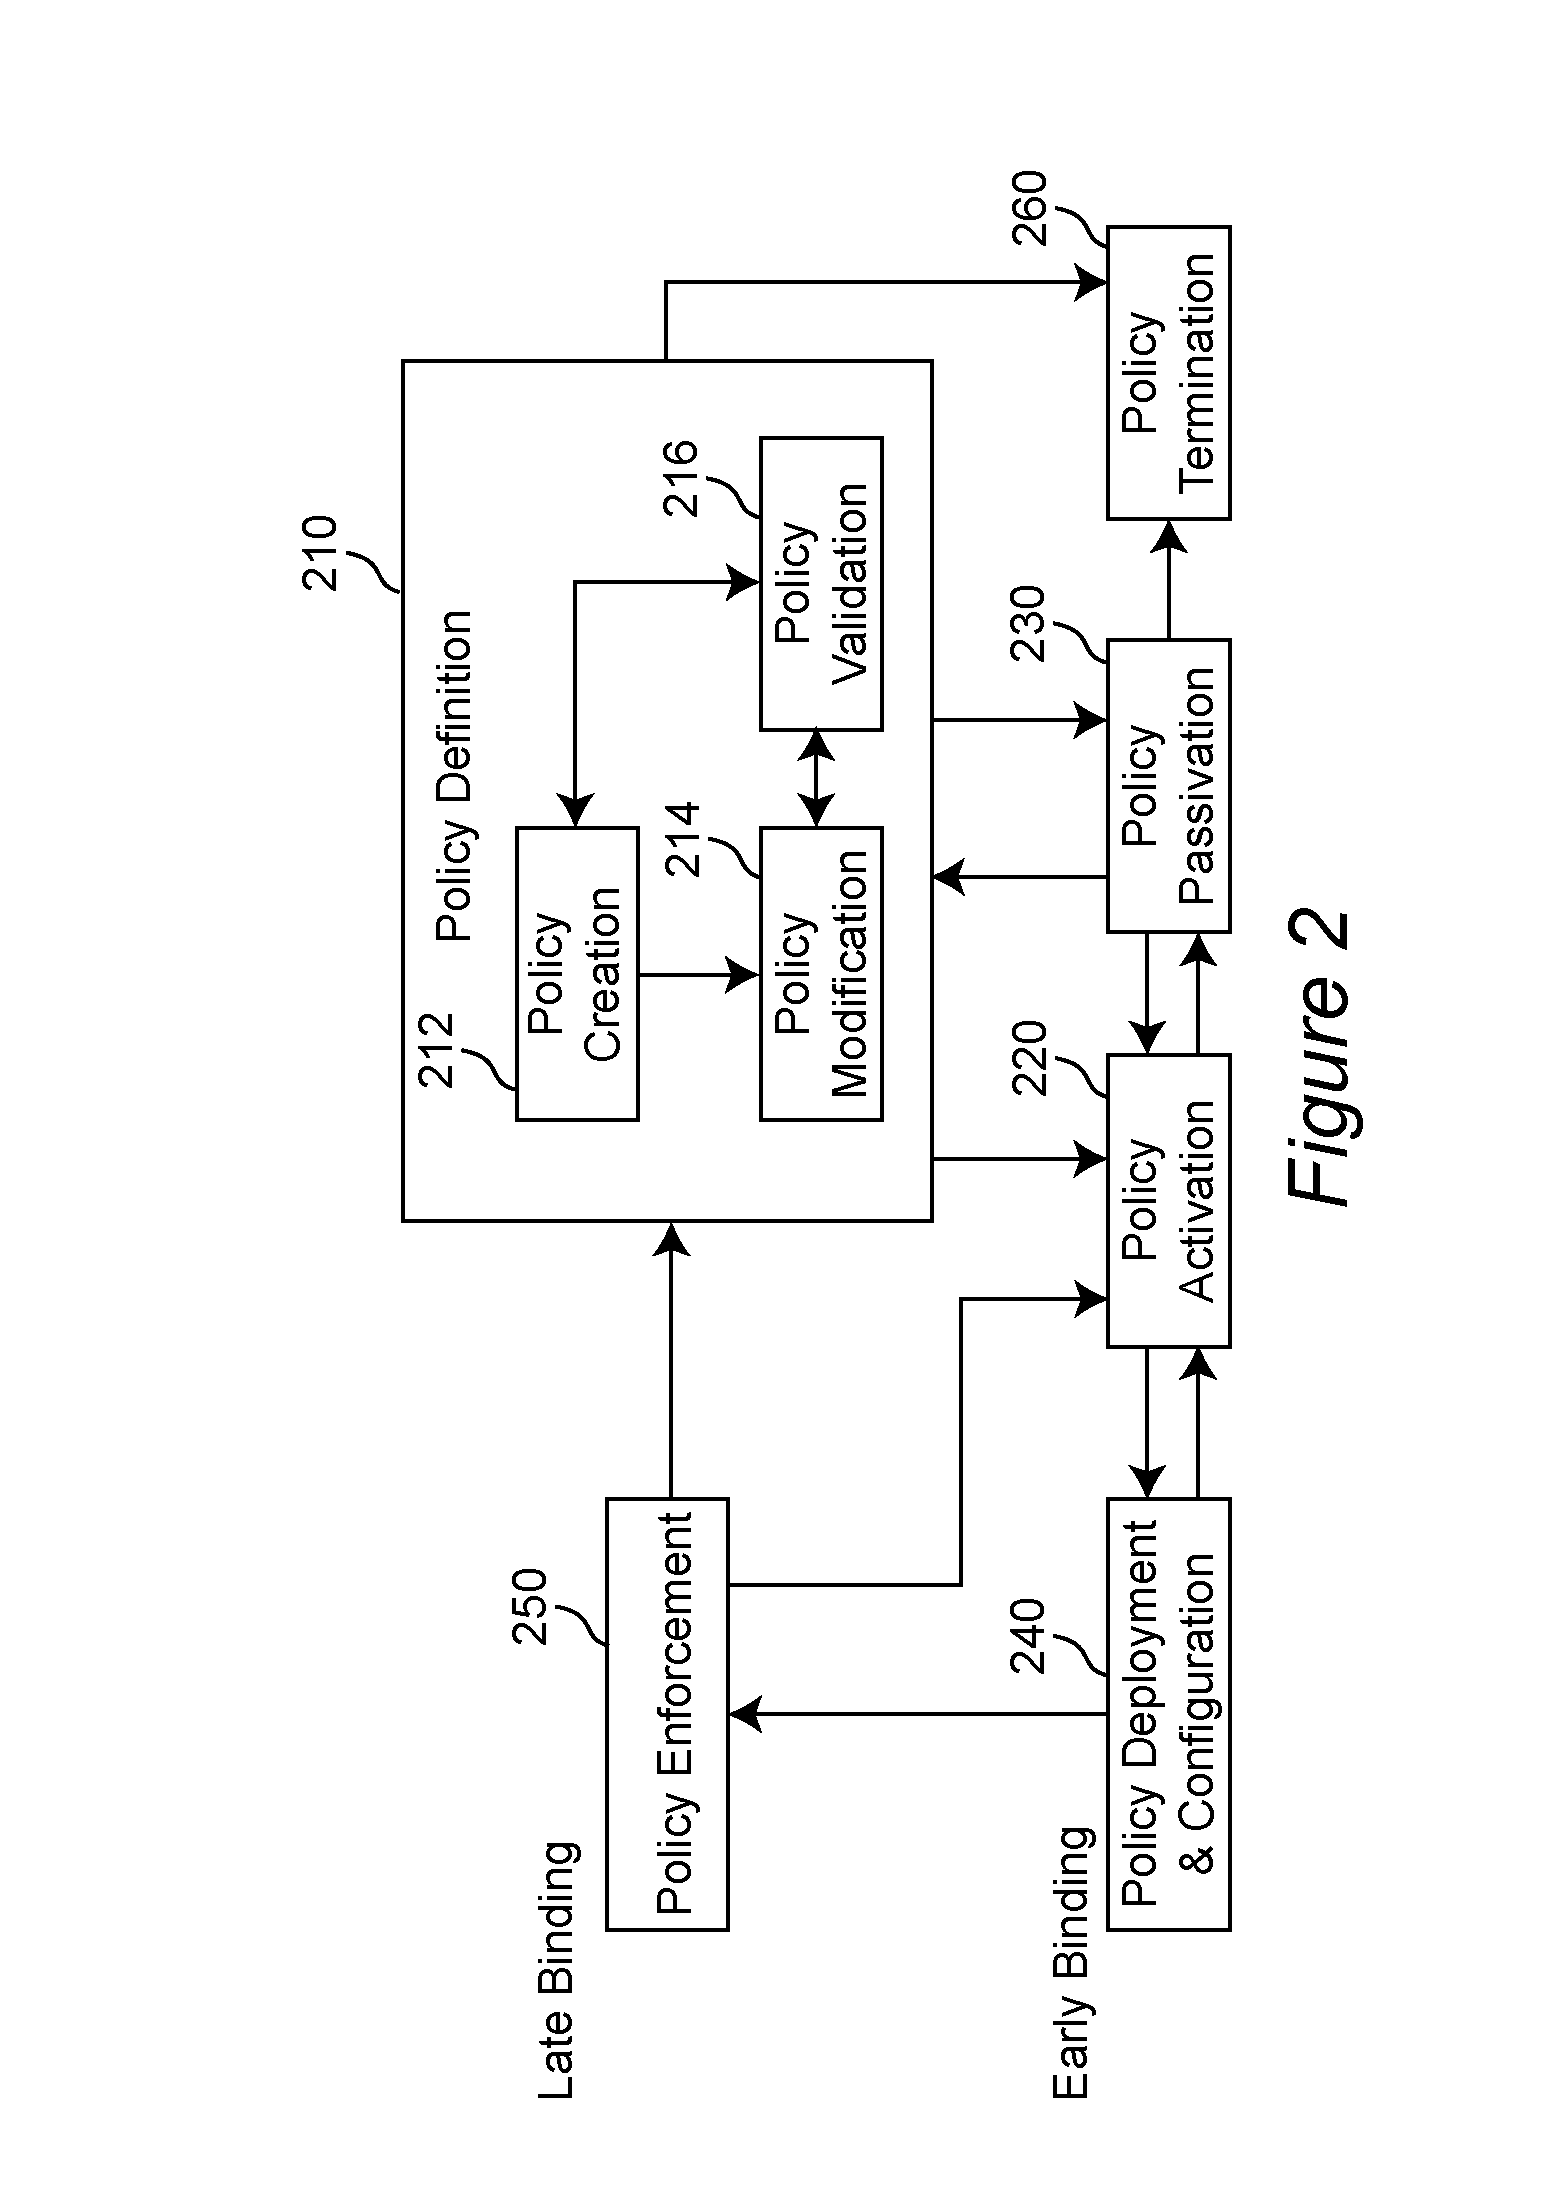 Method and apparatus of on demand business activity management using business performance management loops